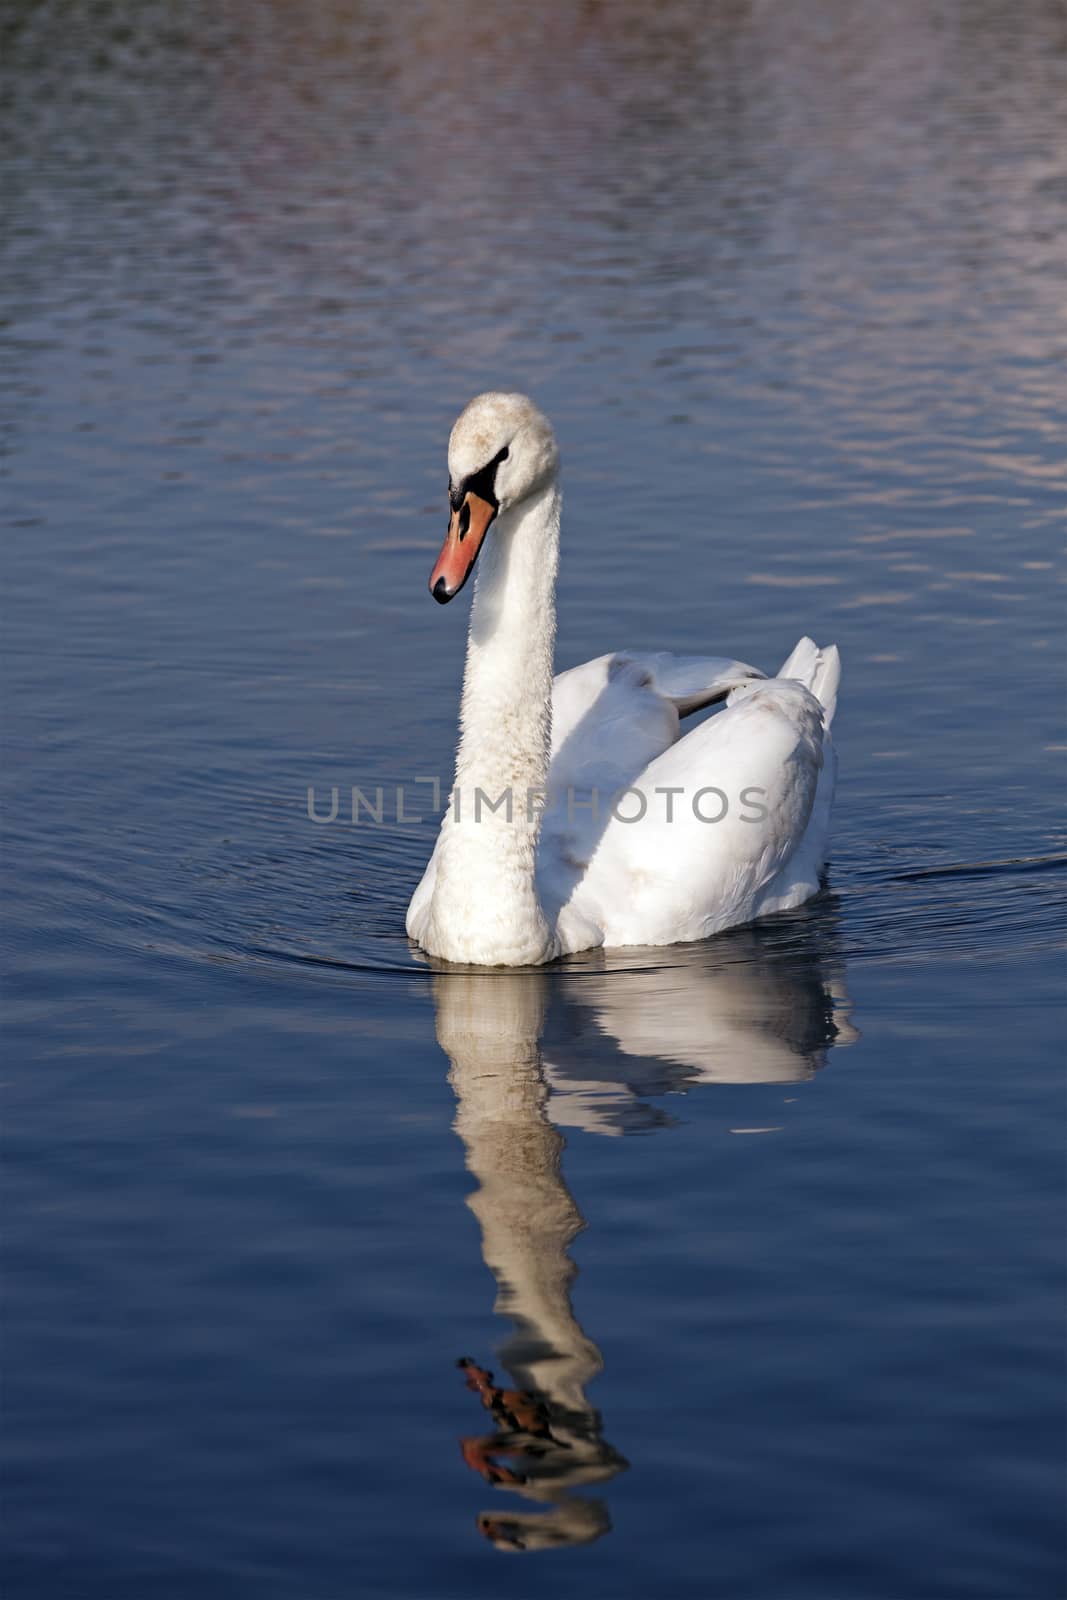 the white swan floating on the lake. close up